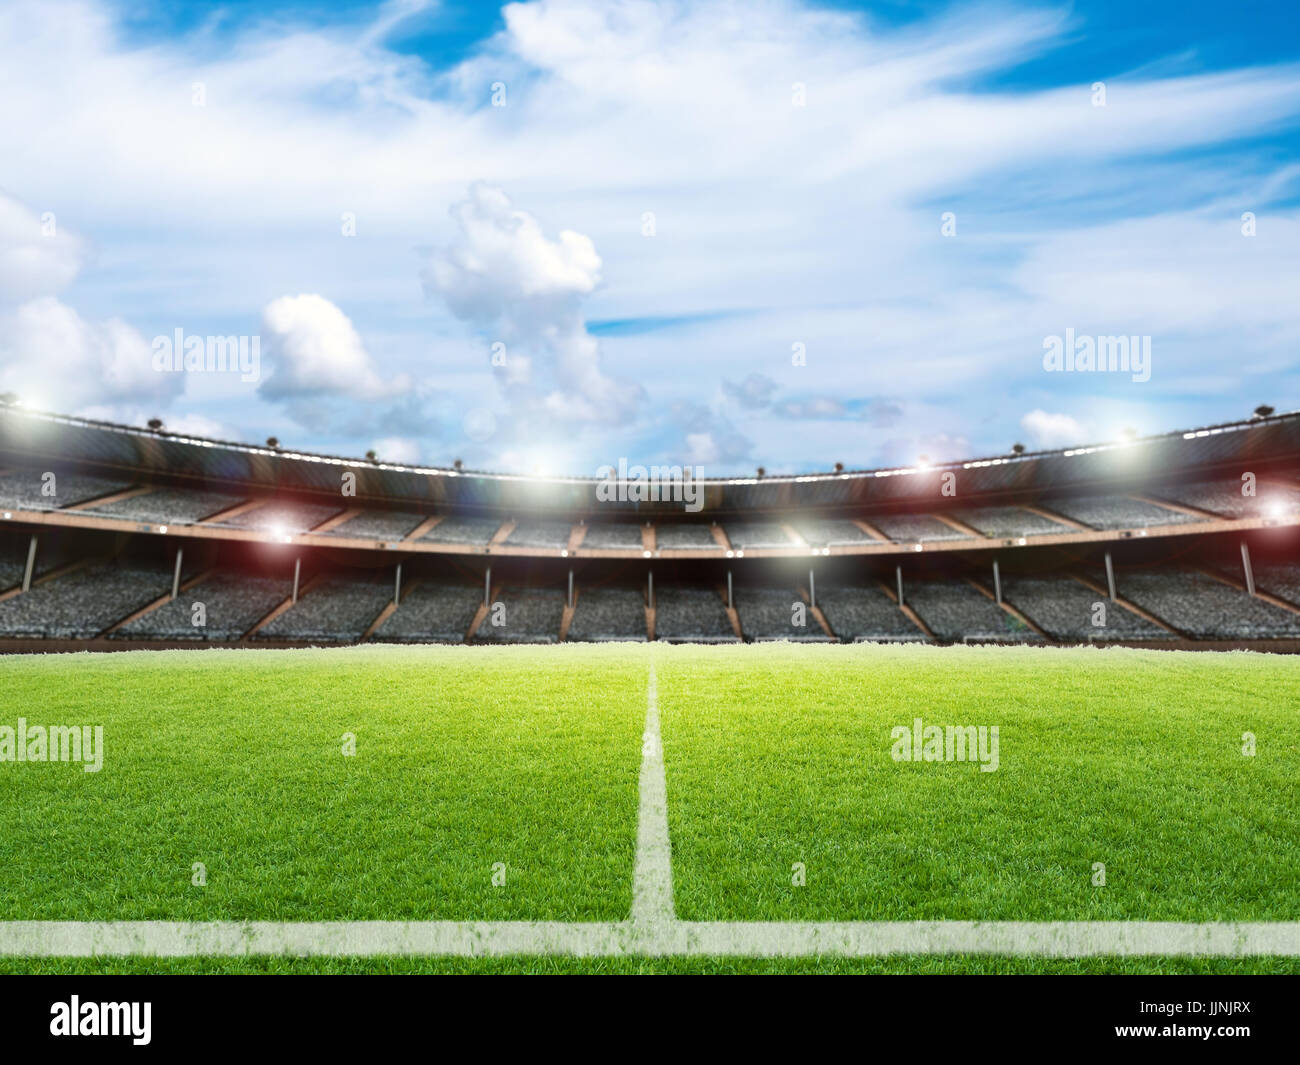 3d rendering soccer stadium with soccer field background Stock Photo